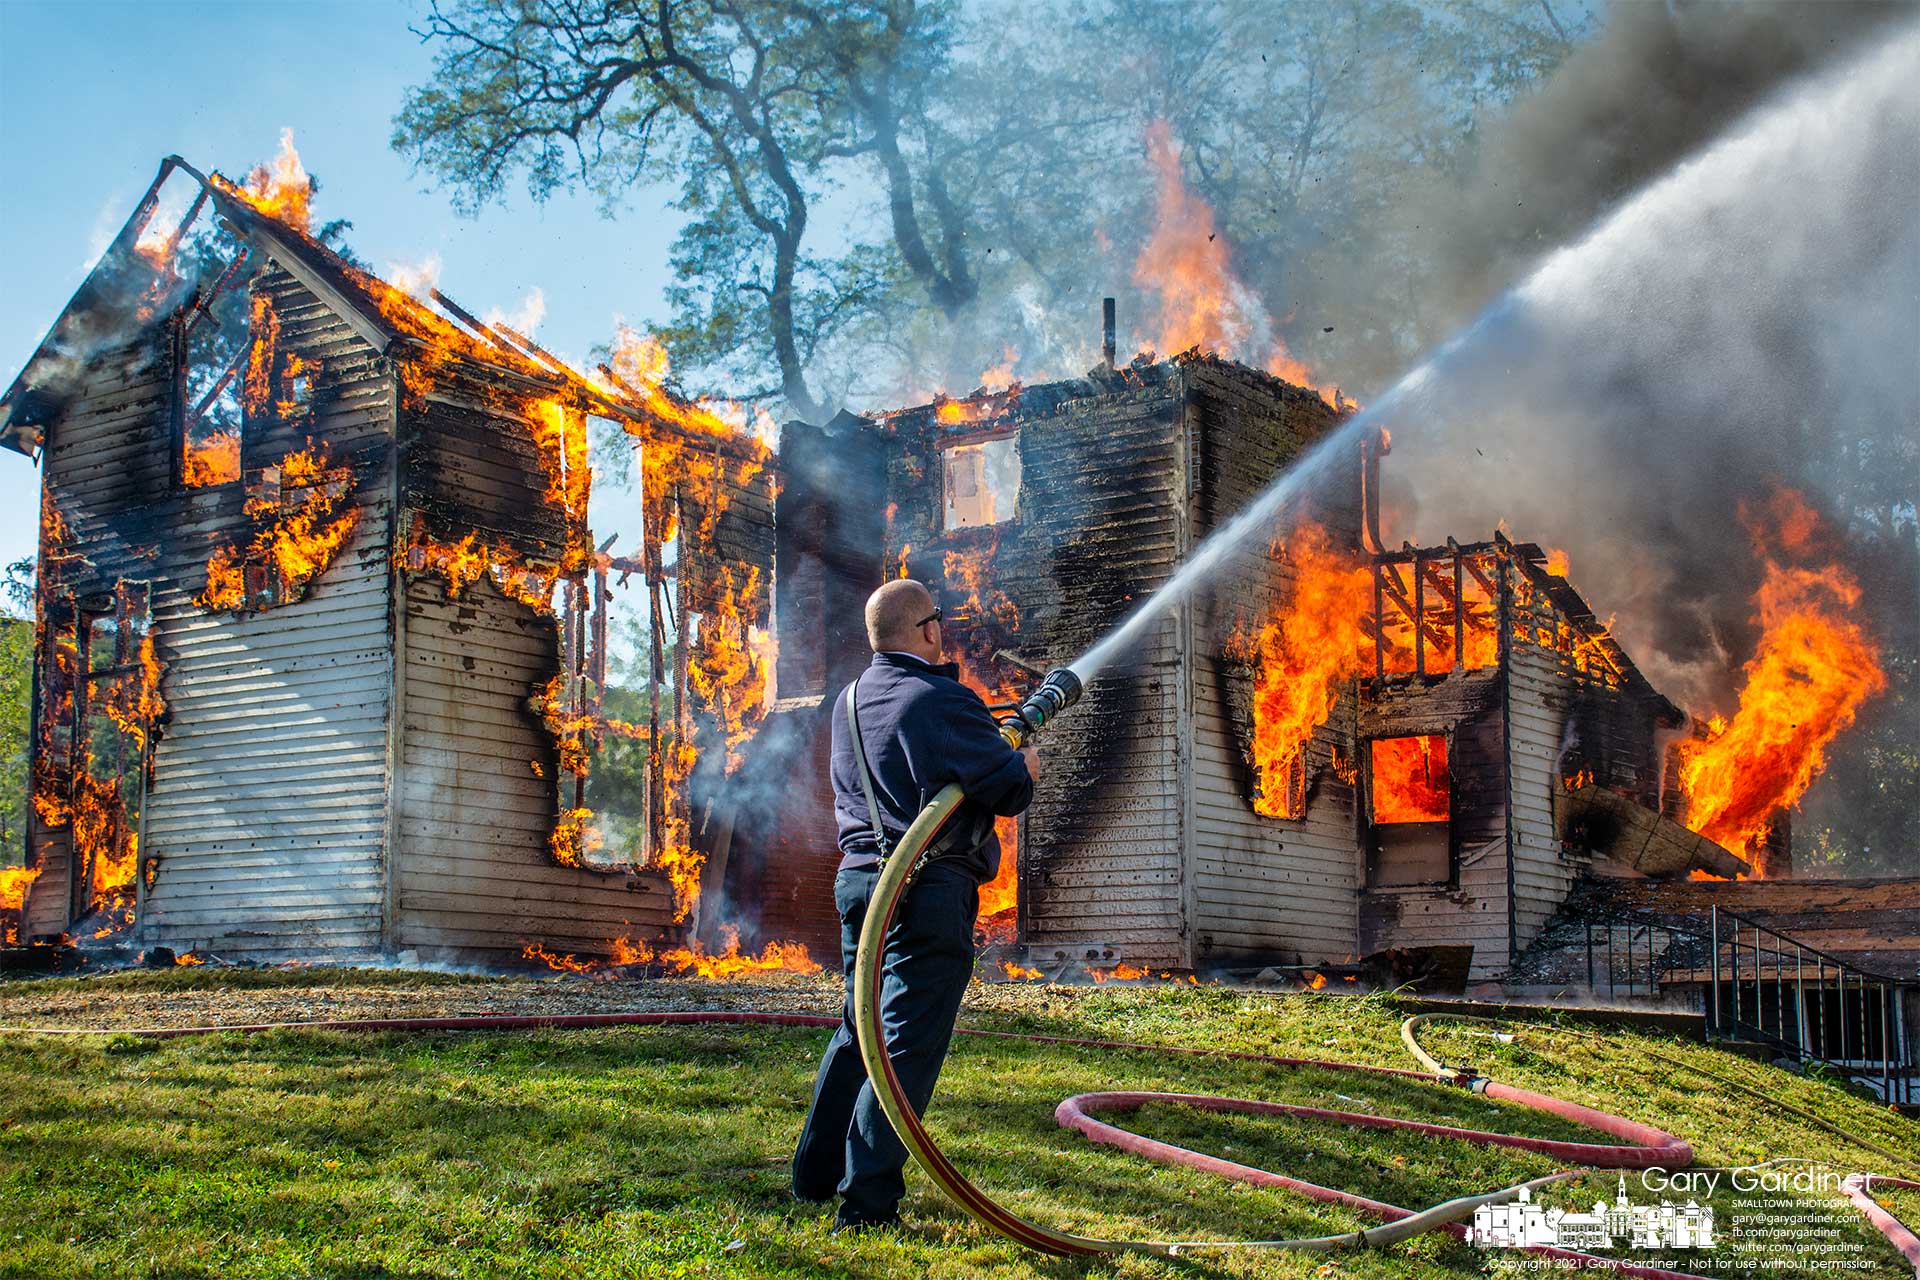 Westerville Fire Chief Brian Miller sprays water to protect nearby trees as a fire finishes burning a house that was used as training for Westerville and Genoa fire departments. My Final Photo for Nov. 6, 2021.